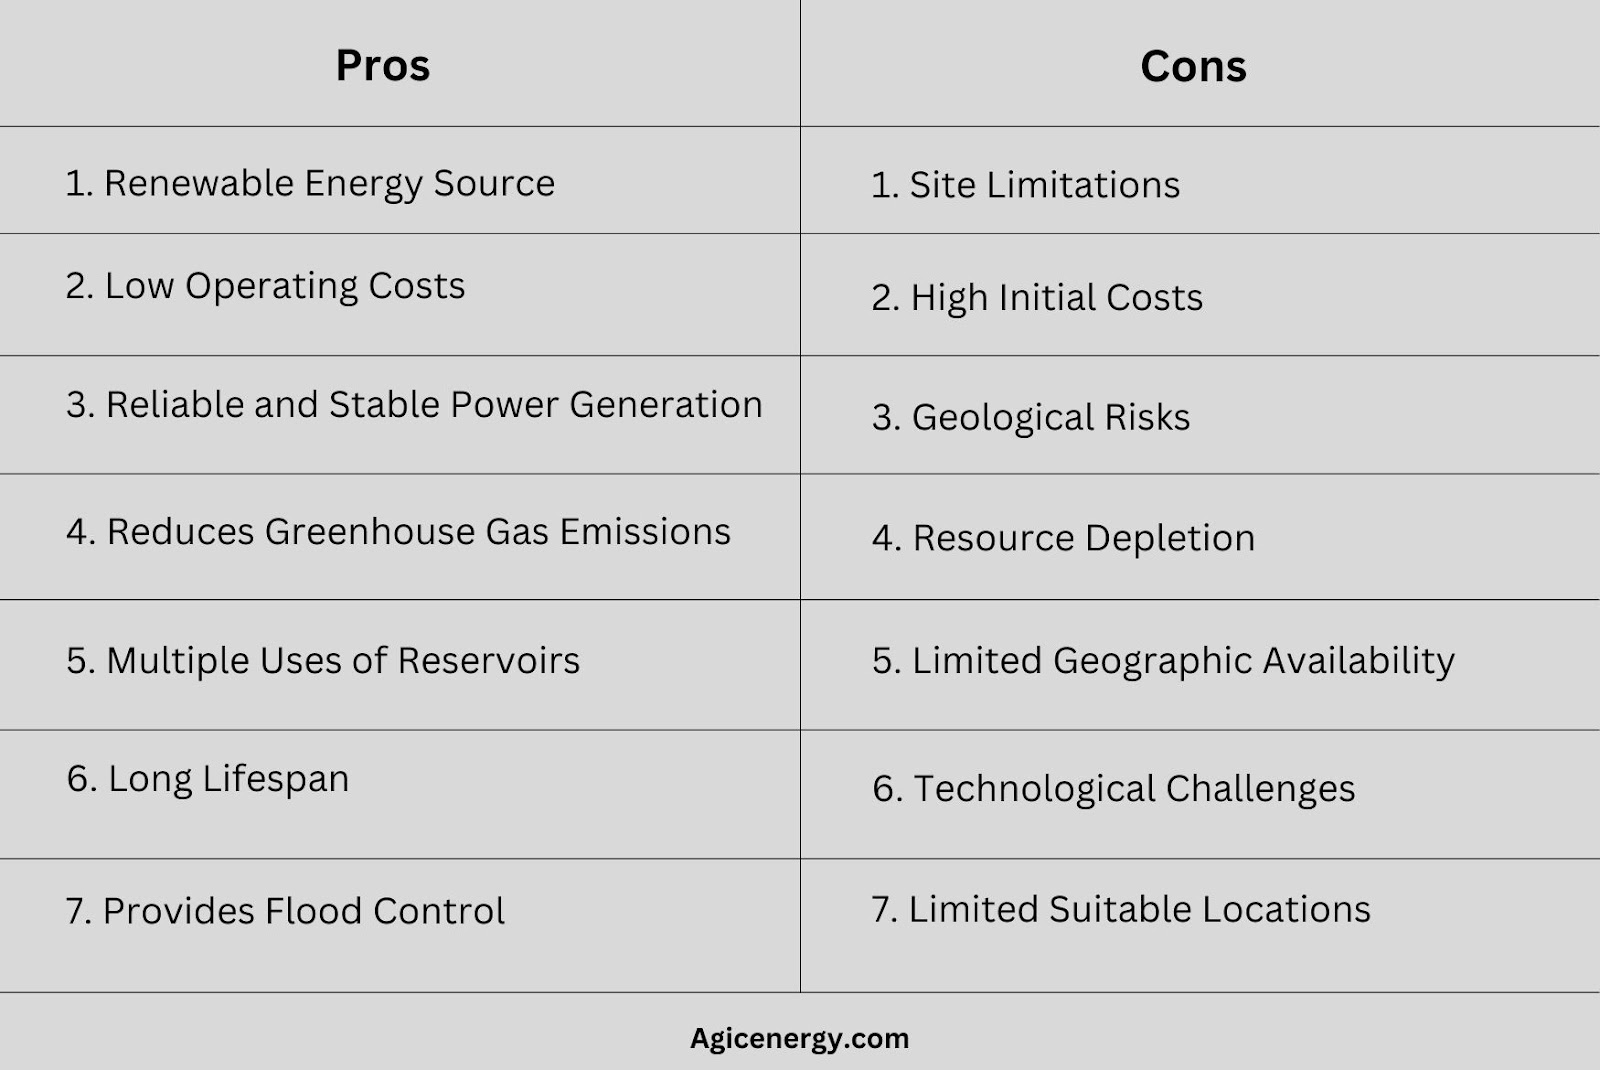 What are the Pros & Cons of Hydropower